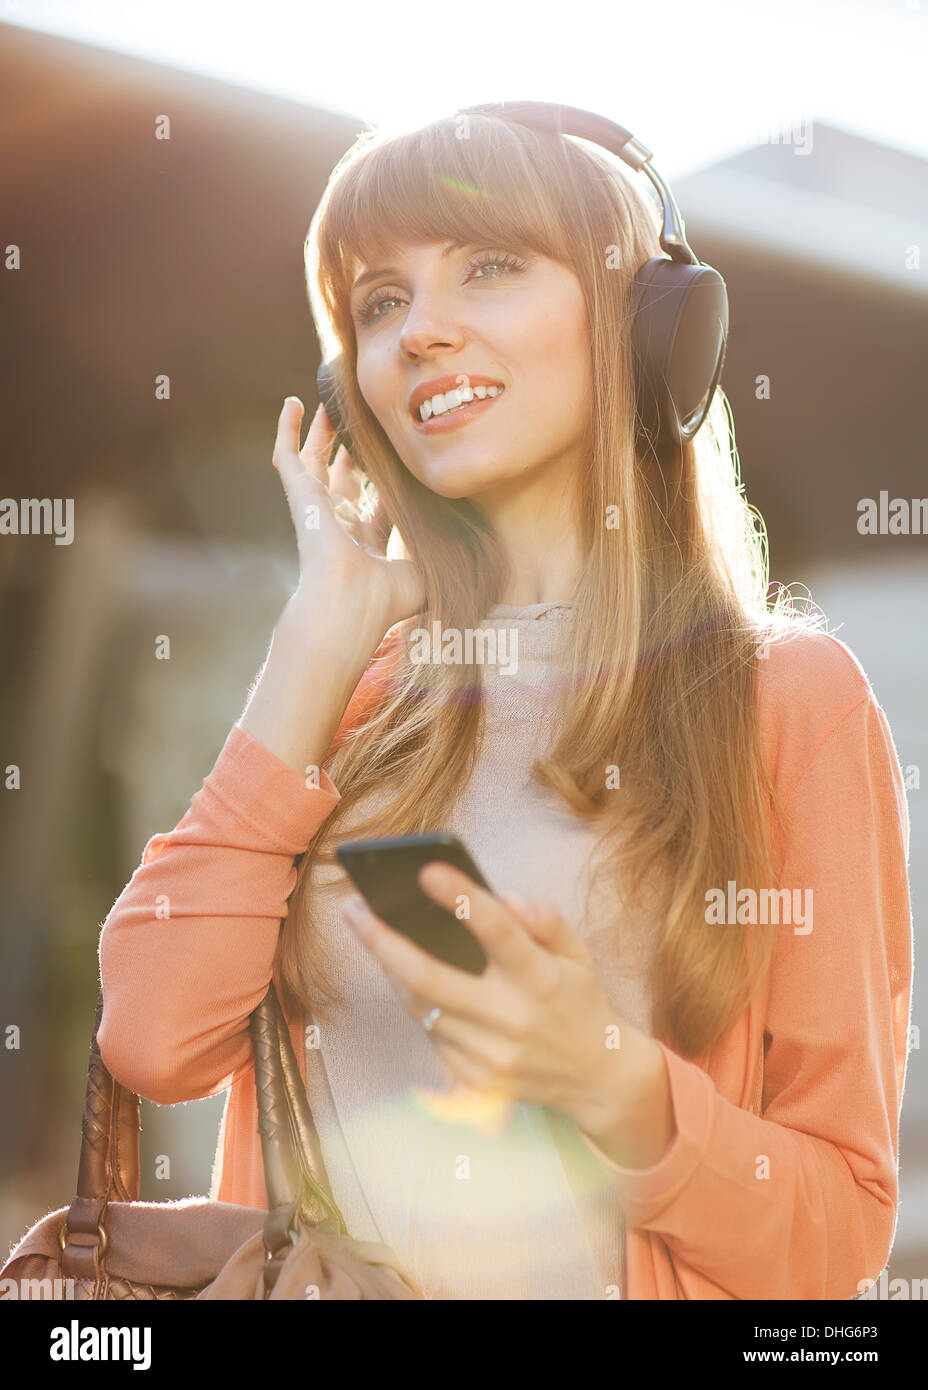 Young beautiful girl listening to MP3 player on the street Stock Photo